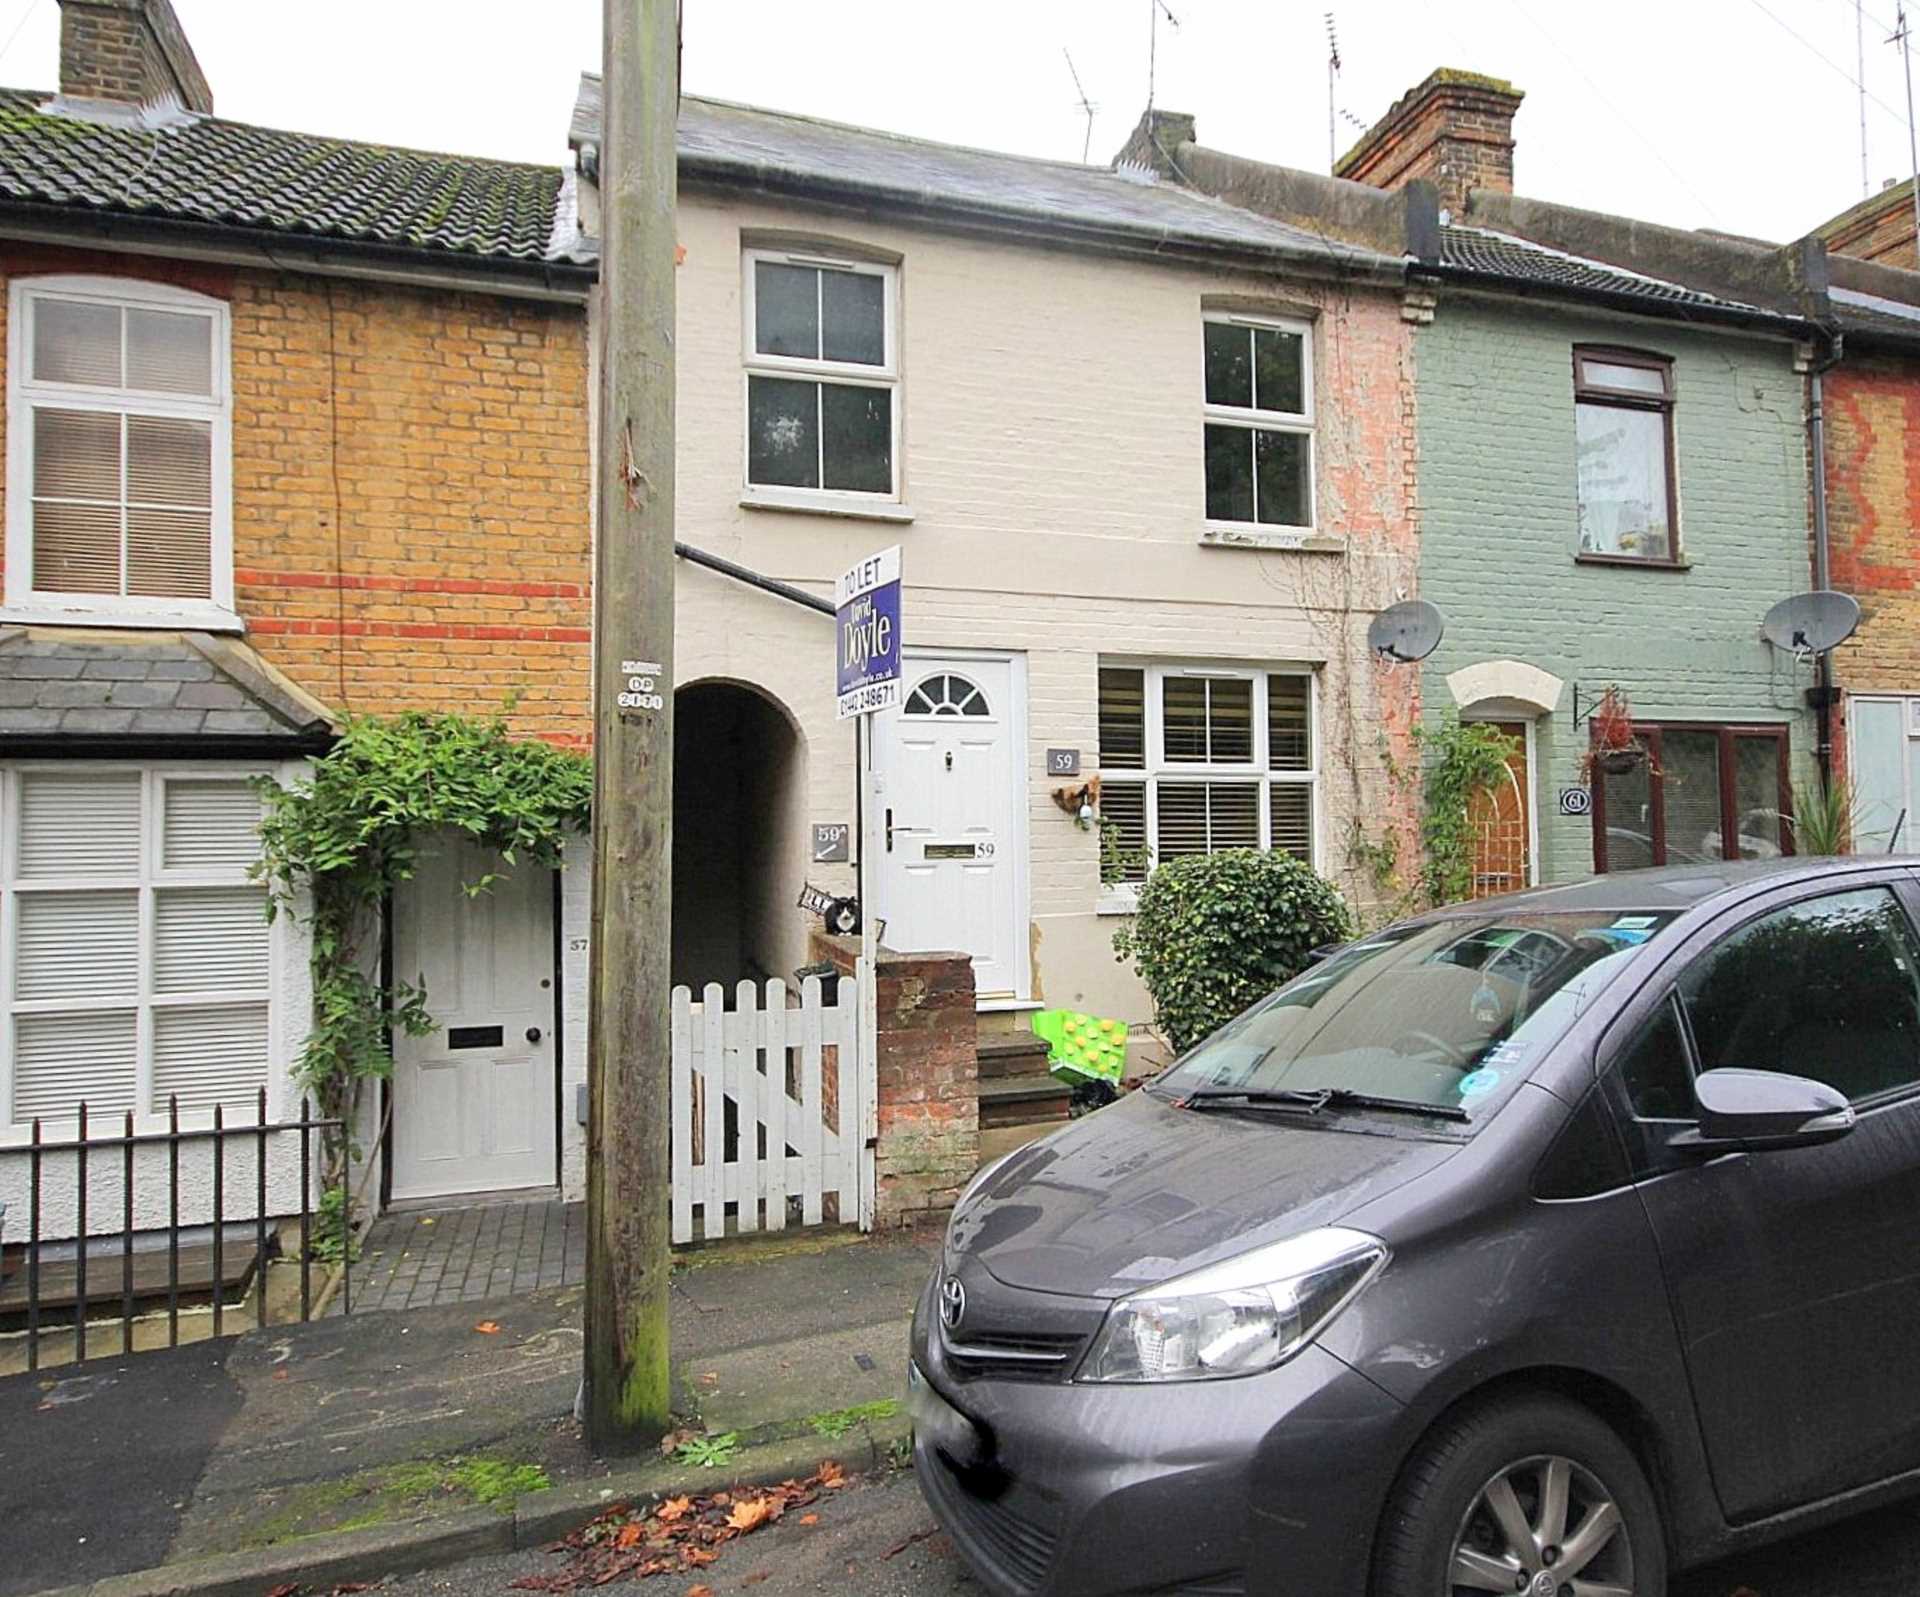 SUPERBLY PRESENTED AND PROPORTIONED DUPLEX MAISONETTE WITH STUDY AREA AND LARGE GARDEN, Image 1